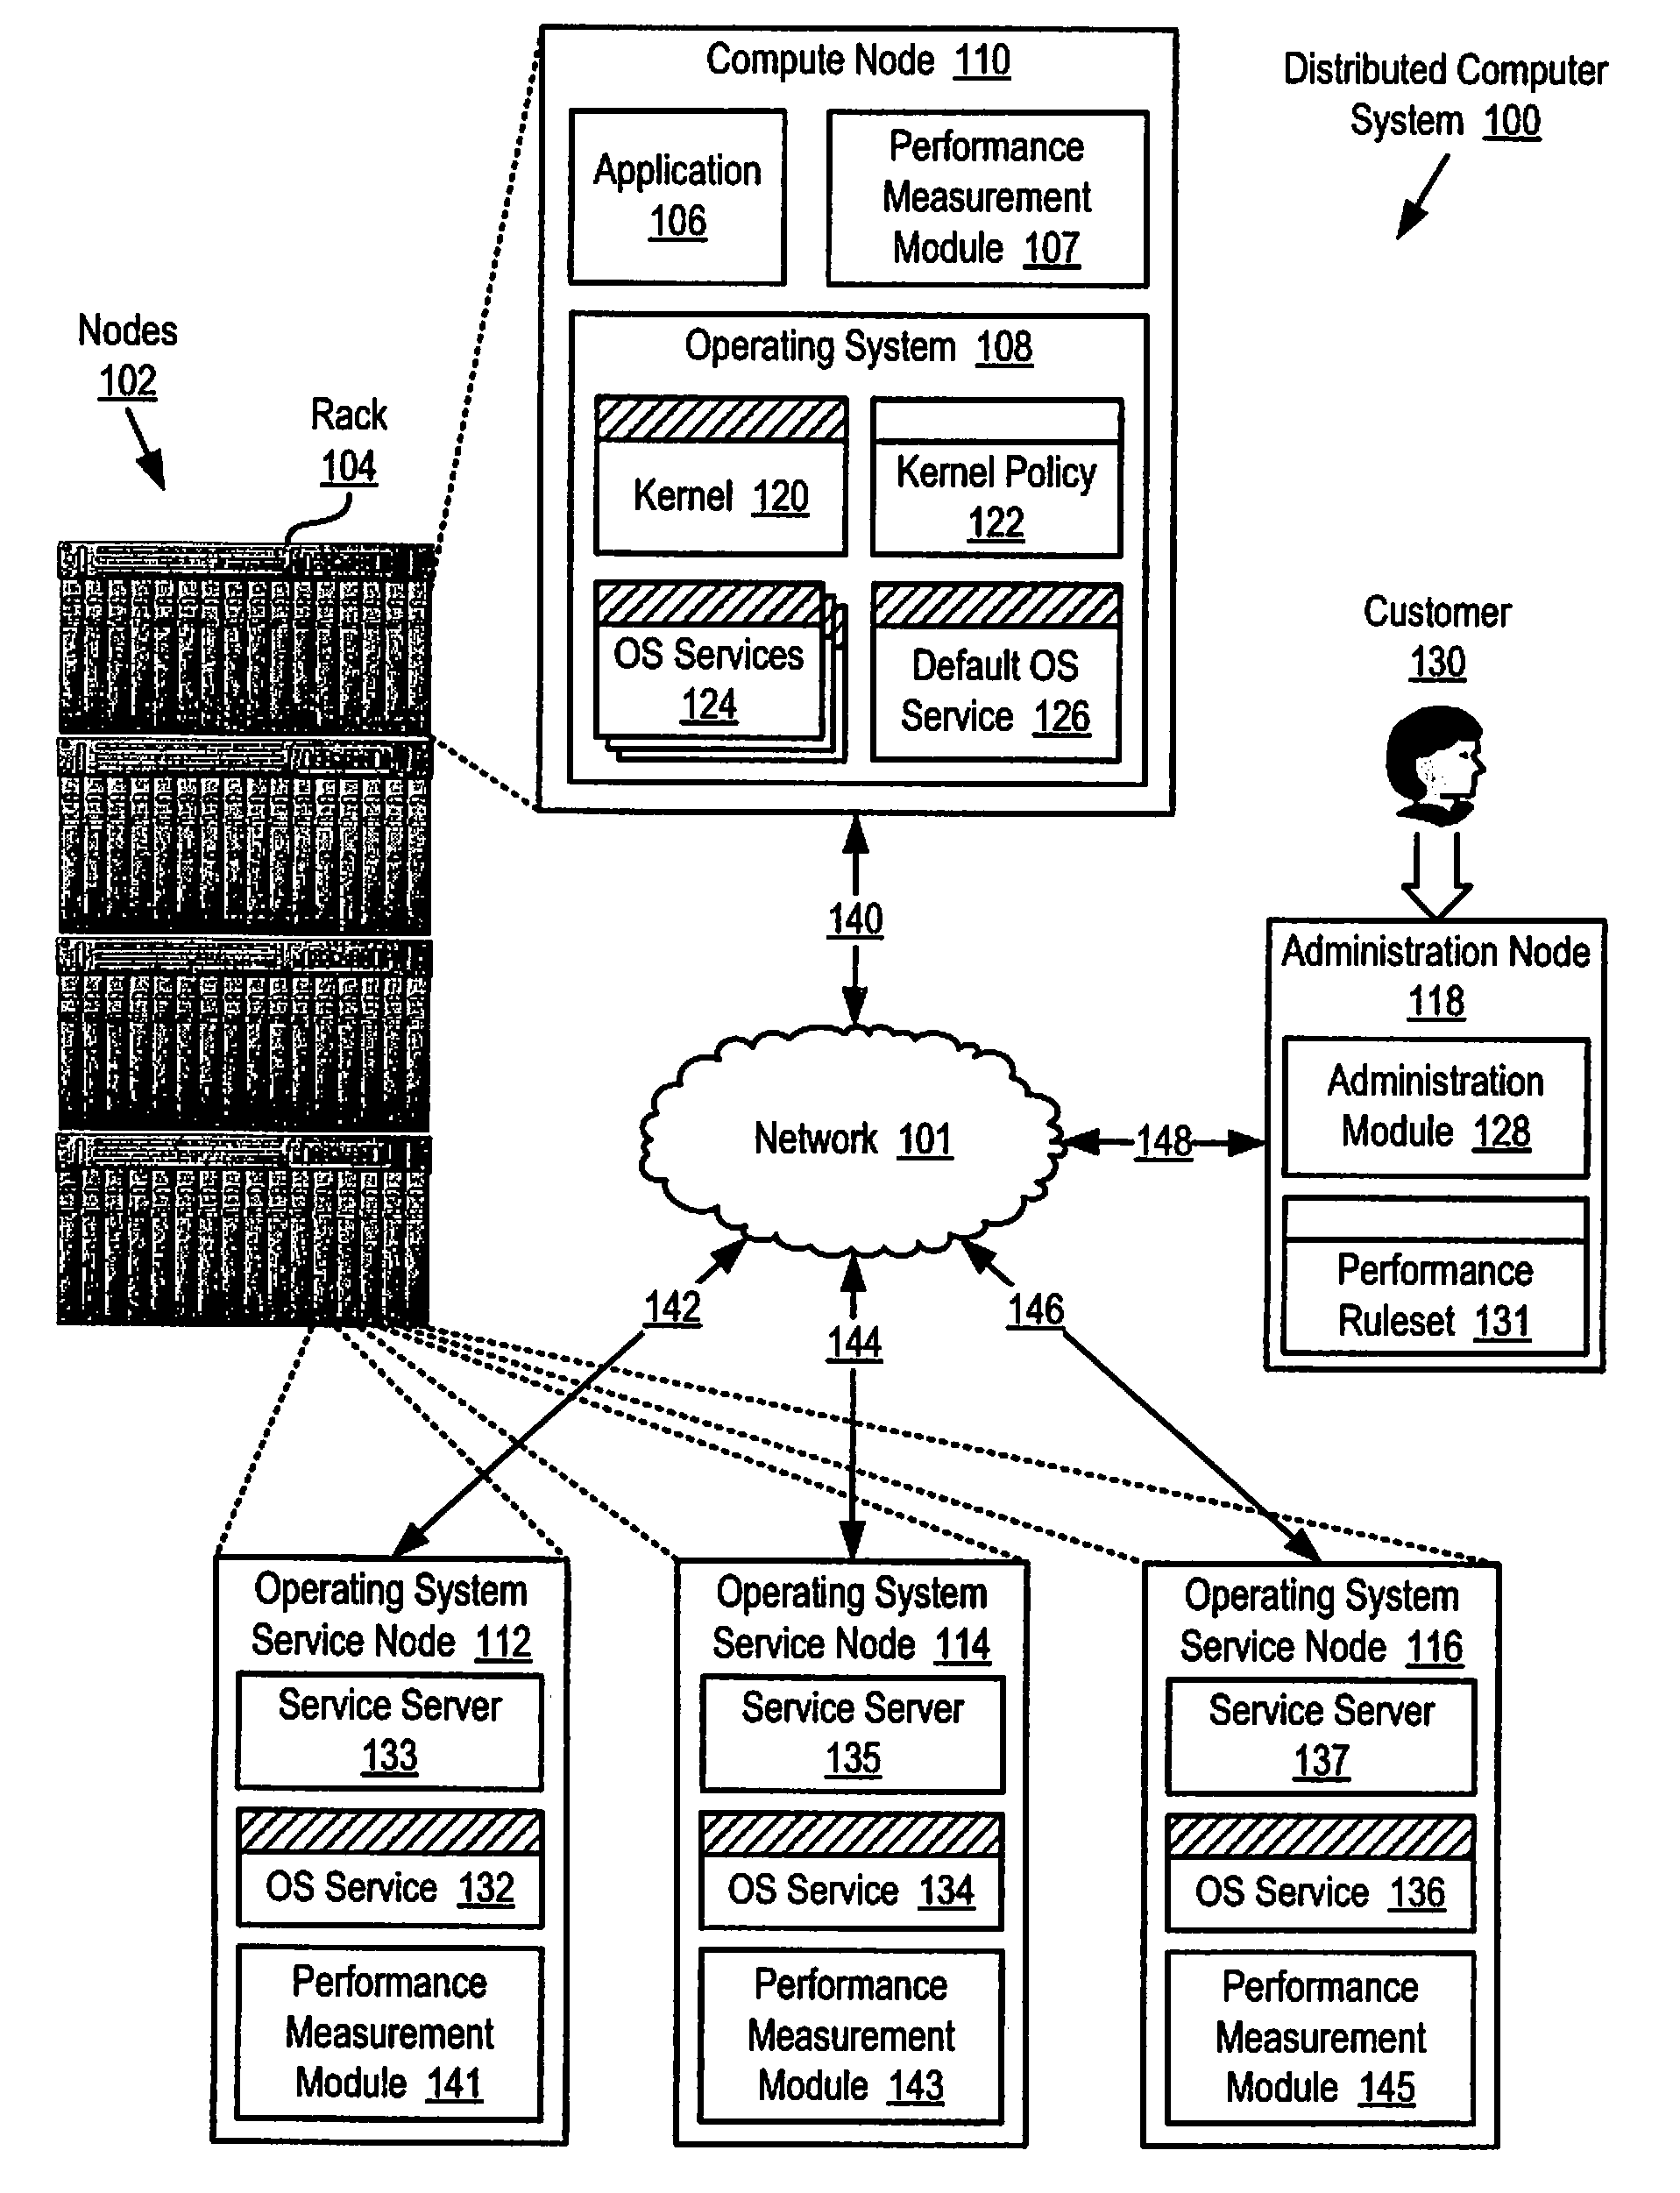 Providing policy-based operating system services in an operating system on a computing system